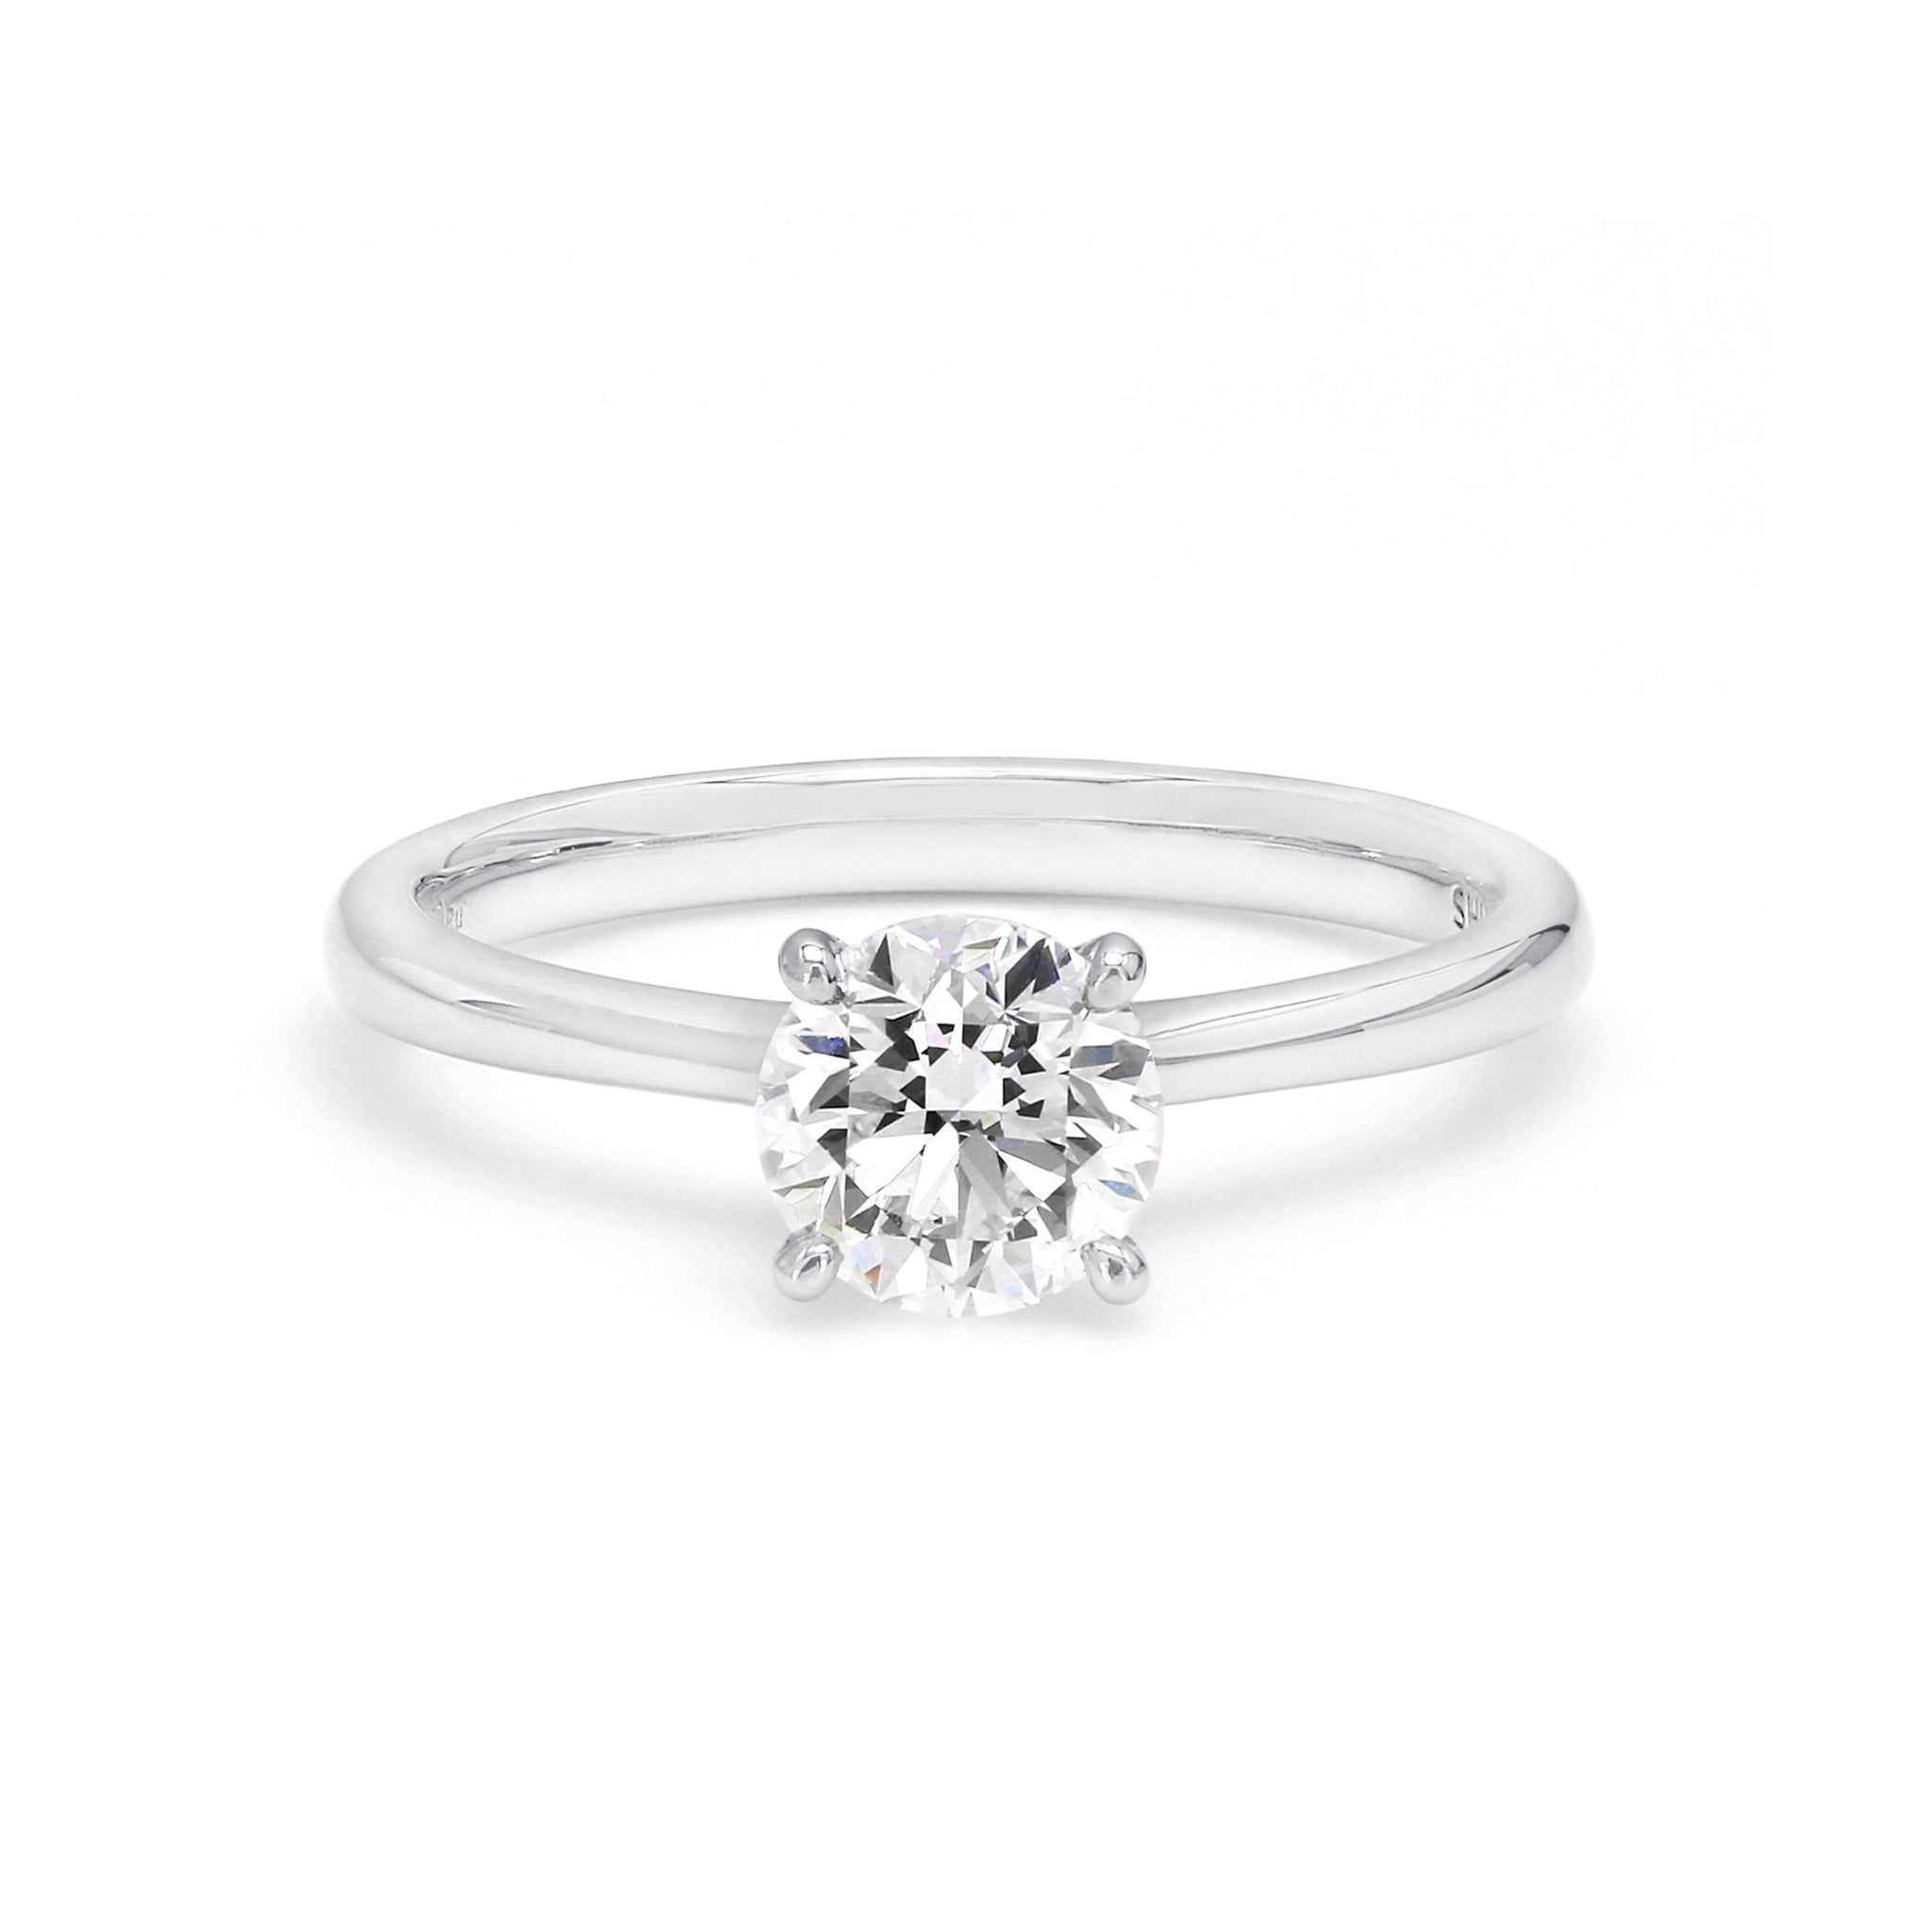 Shimansky - Victoria Solitaire Diamond Ring 1.00ct crafted in Platinum